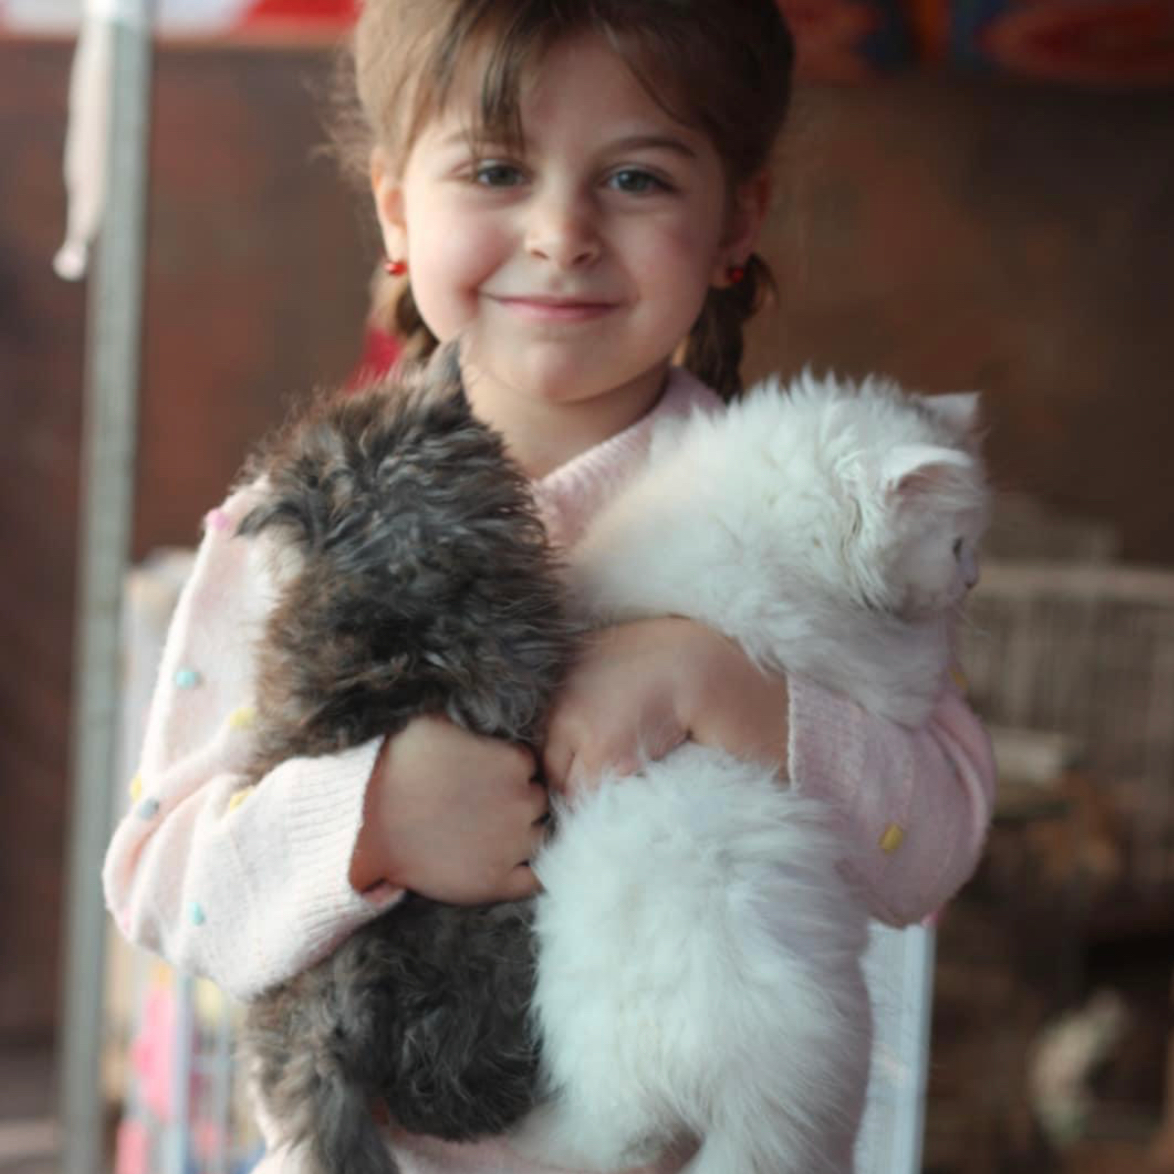 The children of Gaza take comfort in the animals. /Sulala Society for Animal Care